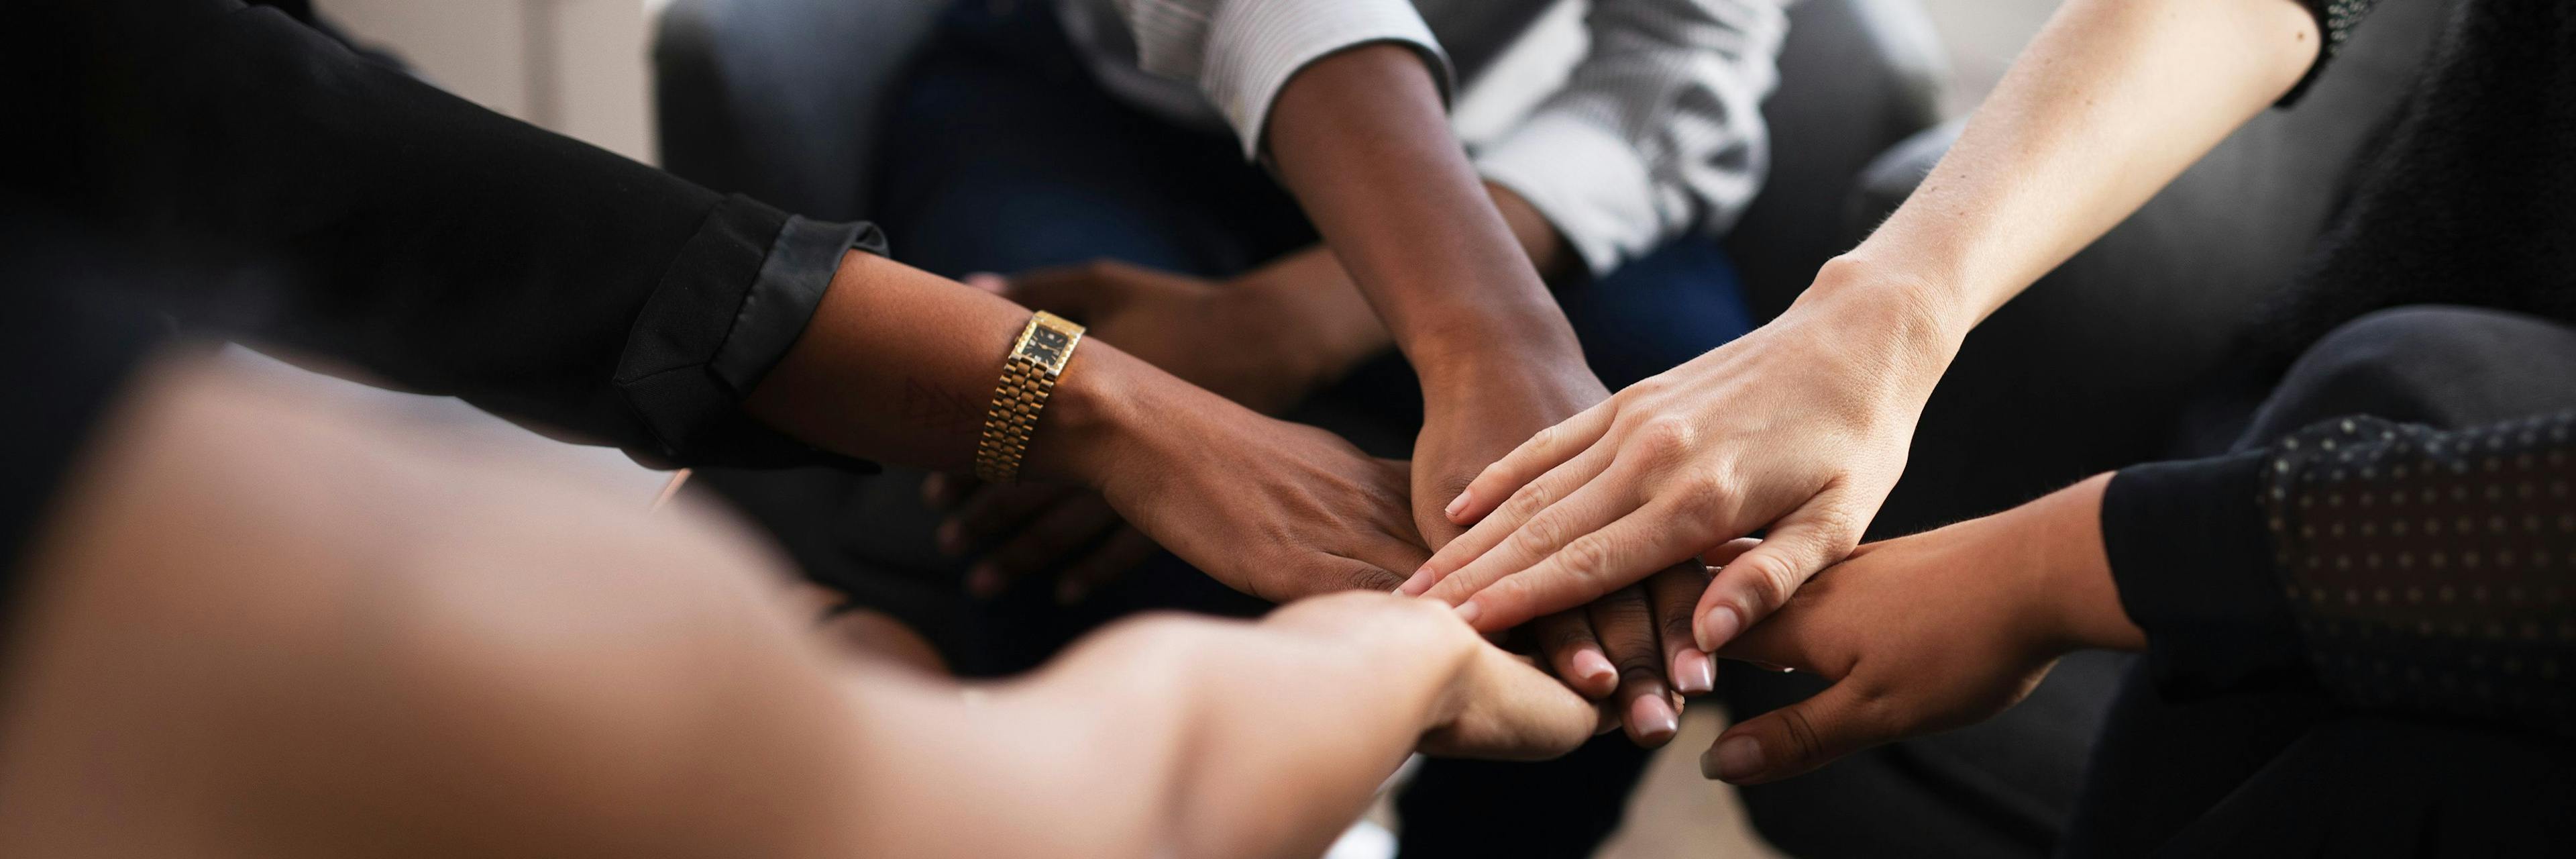 "Collaborative care quality initiatives may have become an insurance industry buzzword, but the true spirit of collaborating to save lives has always lived within clinicians."